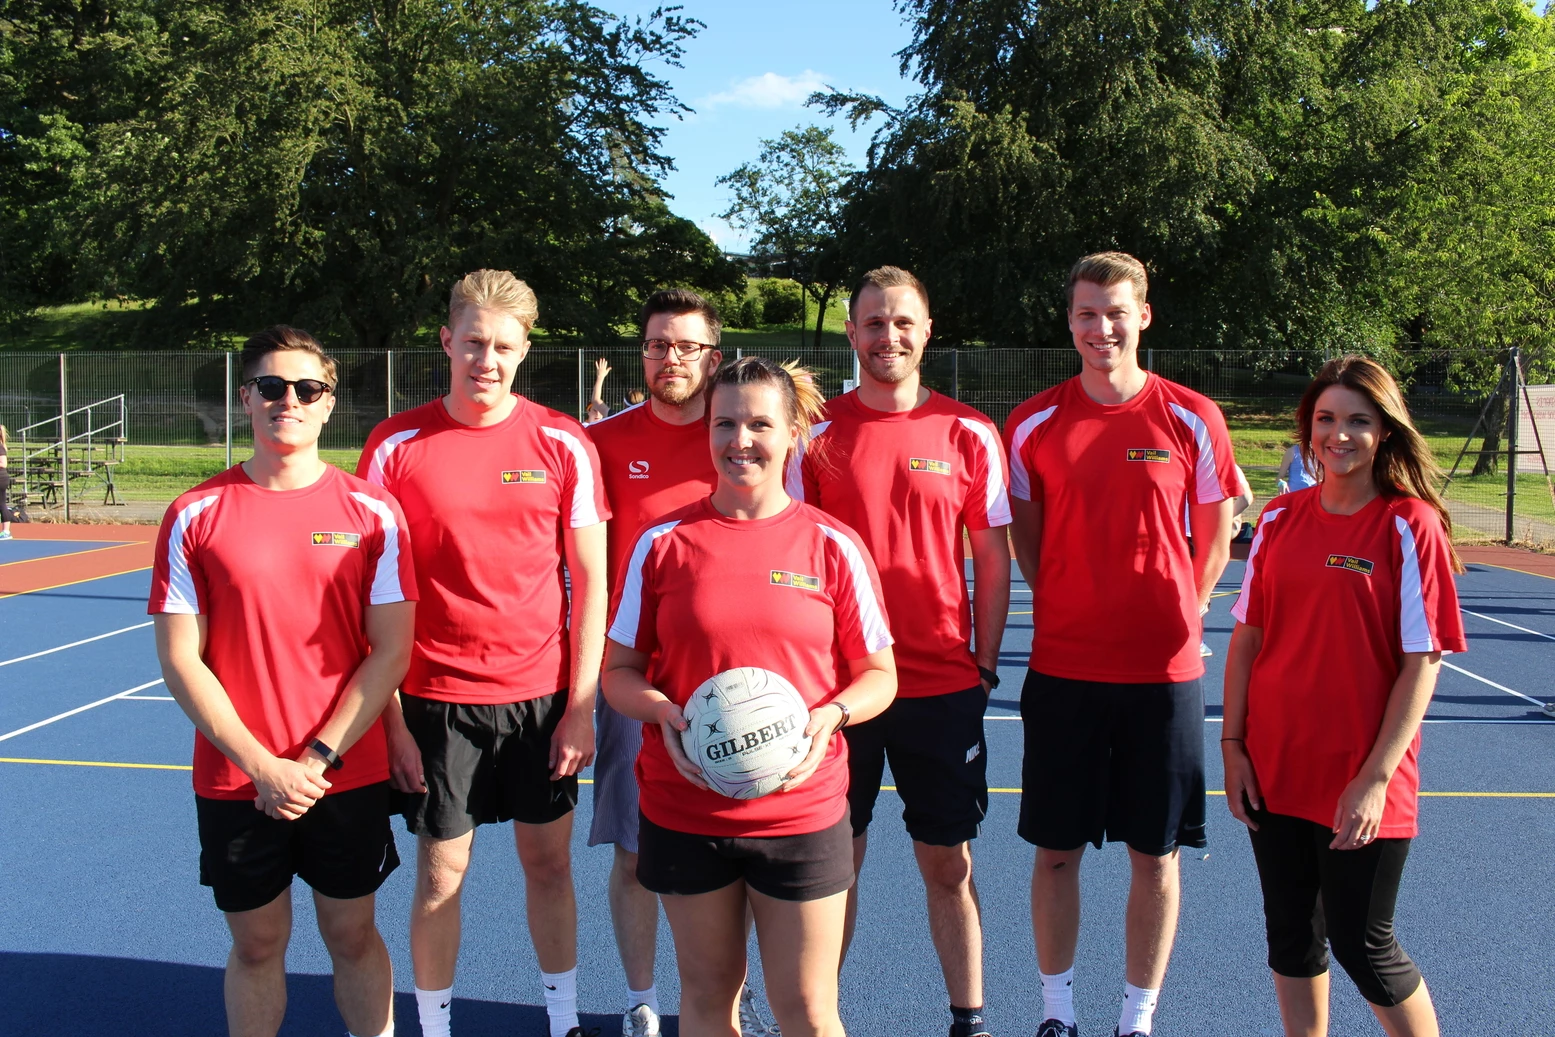 Vail Williams' team at a recent charity netball event